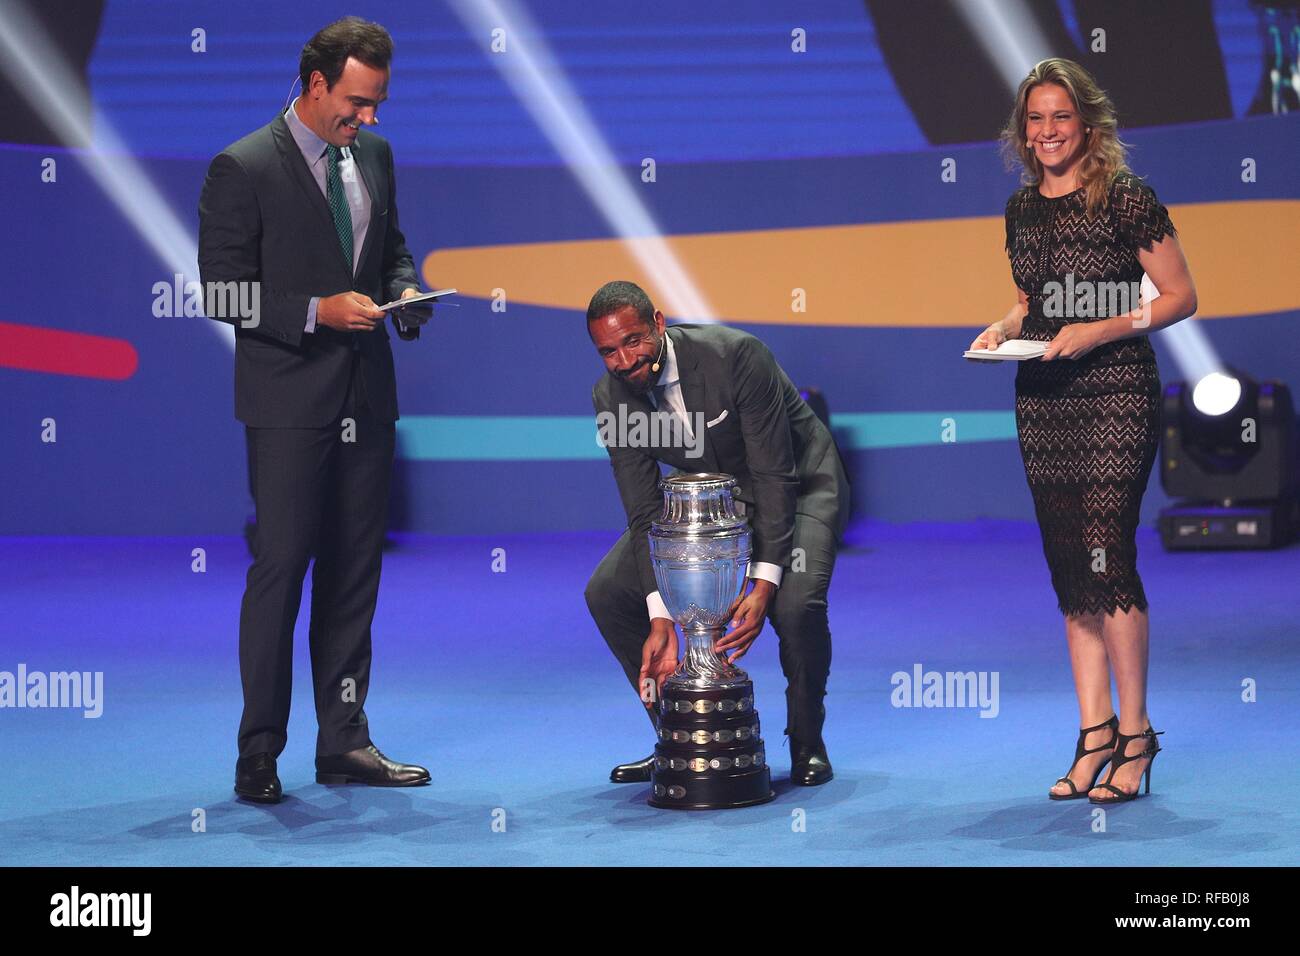 Rio De Janeiro, Brazil. 24th Jan, 2019. Chile's football player Jean Beausejour (C) puts down the trophy during the official draw ceremony of the CONMEBOL Copa America 2019 in Rio de Janeiro, Brazil, on Jan. 24, 2019. The draw result was Brazil, Bolivia, Venezuela and Peru in Group A, Argentina, Colombia, Paraguay and Qatar in Group B, Uruguay, Ecuador, Japan and Chile in Group C. The tournament will be held from June 14 to July 7 in 5 cities in Brazil. Credit: Li Ming/Xinhua/Alamy Live News Stock Photo